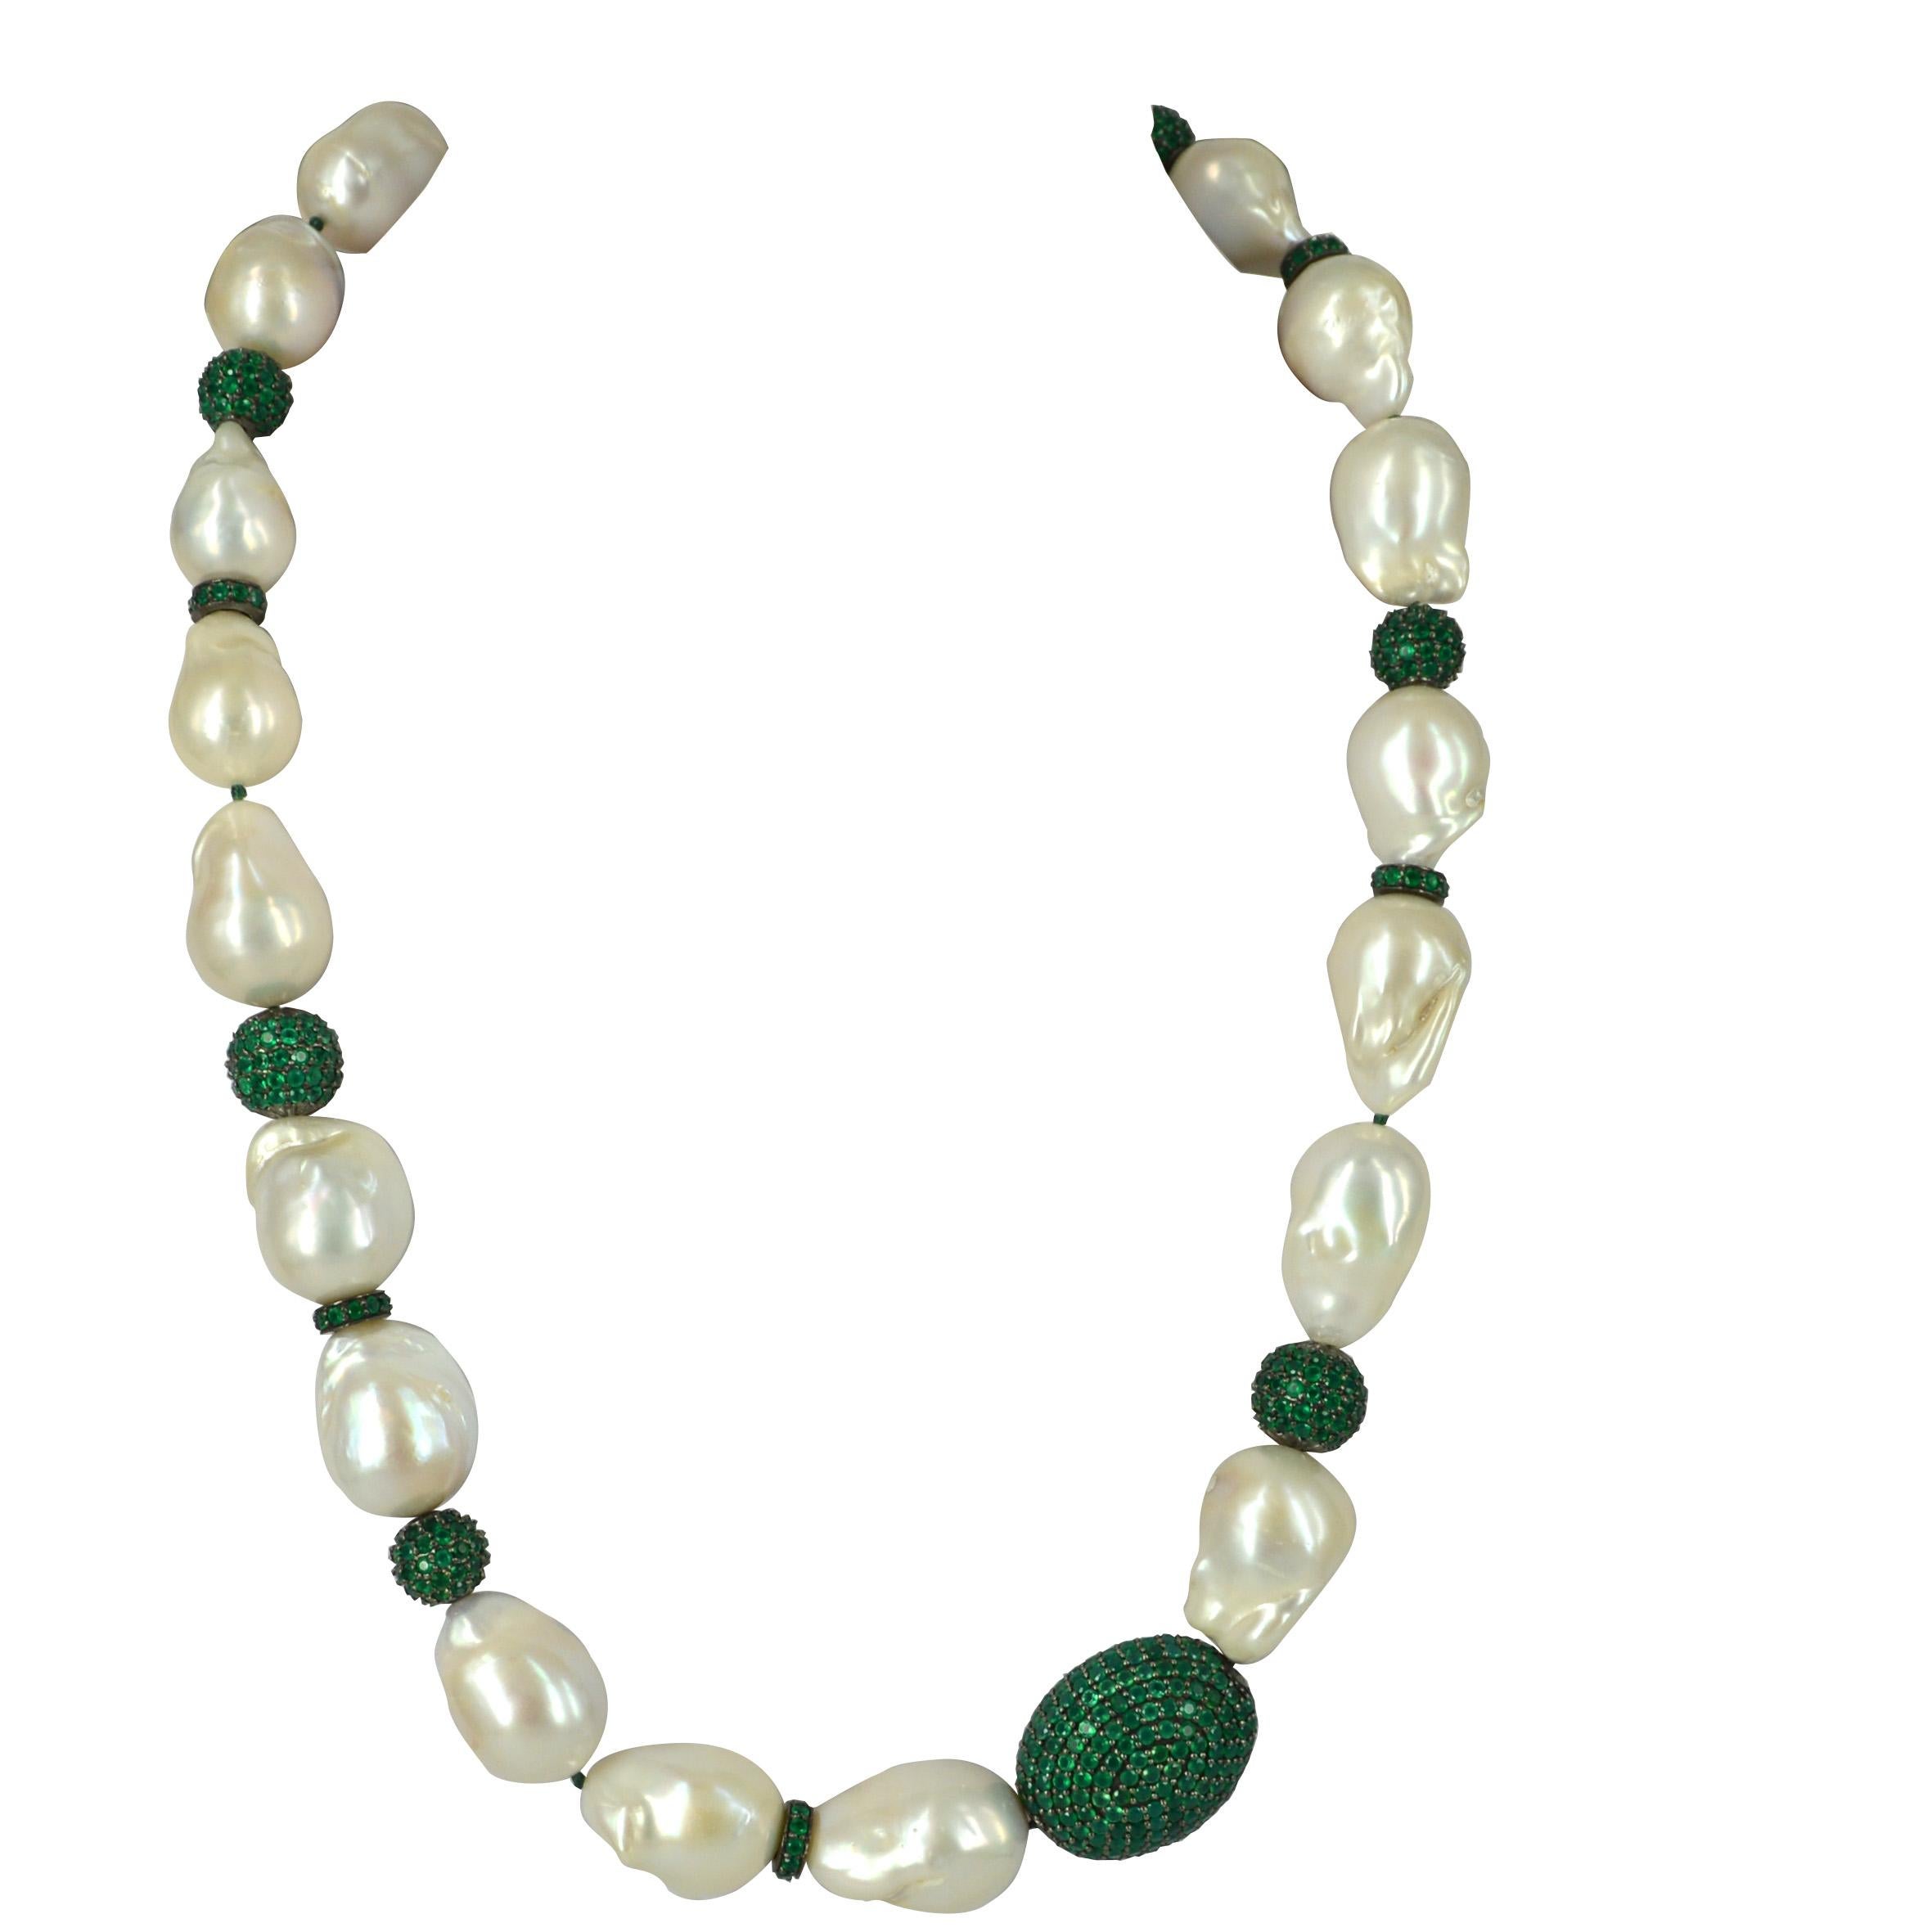 Stunning large Baroque Fresh Water Pearls with random Pave Green Onyx & Sterling Silver beads. Pearls range from 17mm up to 25.8mm long and the Pave Amethyst beads are 10mm & 12mm round 10x3mm rondel and 28x22mm oval shape.
Hand knotted on green